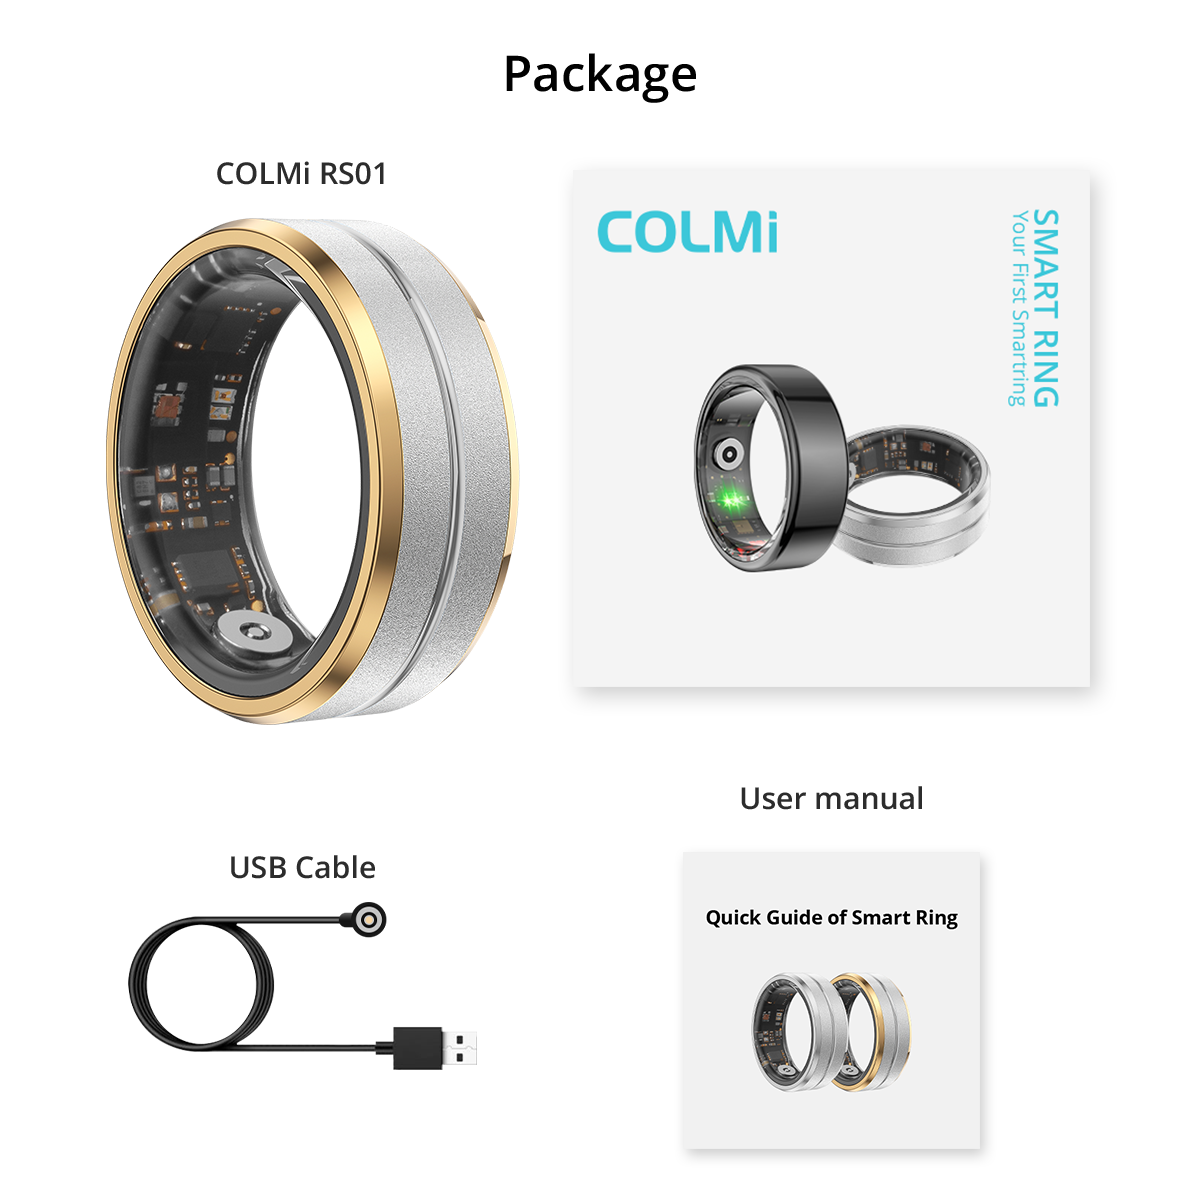 COLMI RS01 smart ring packaging picture